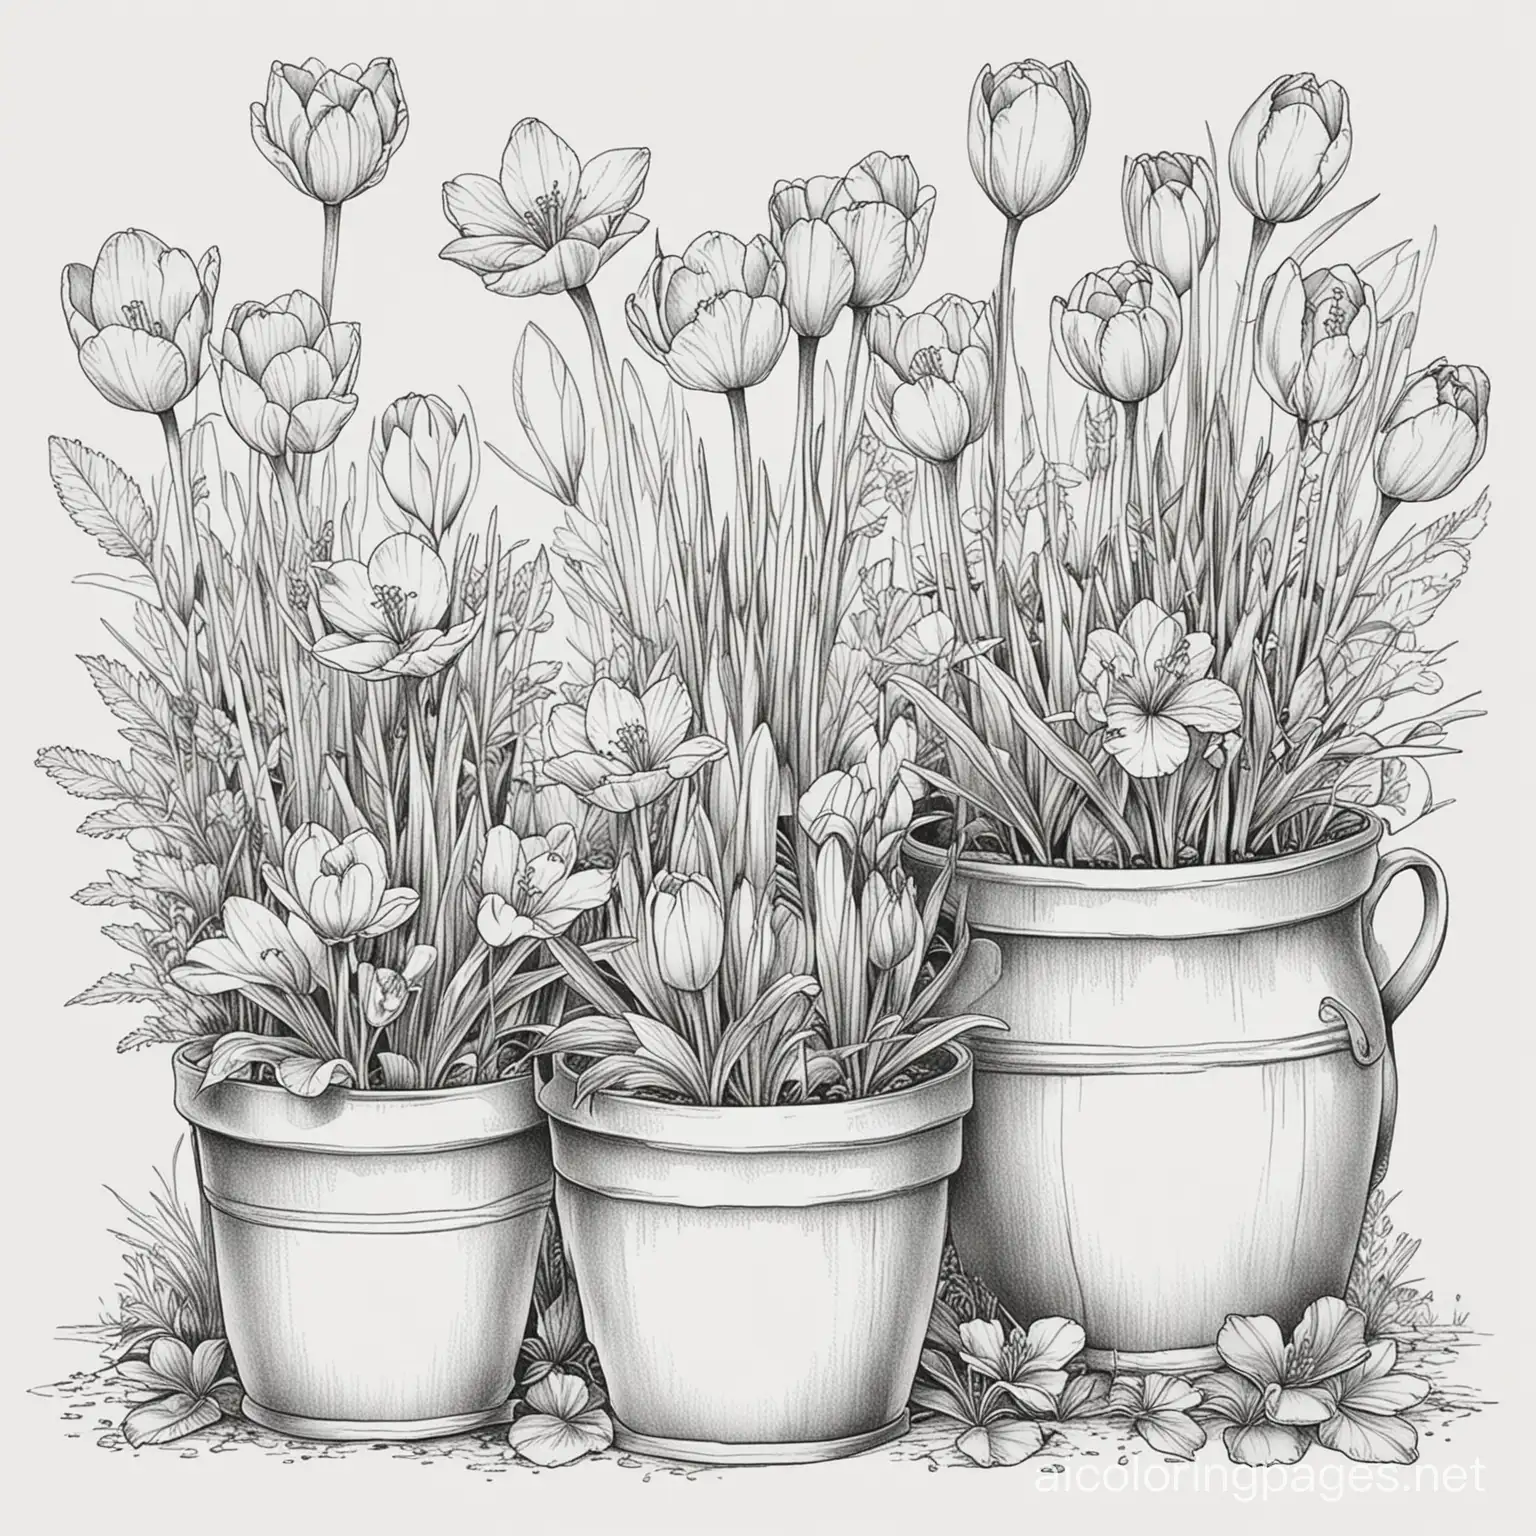 Create a picture for adult coloring in black and white only.  The theme of the picture: British garden. gardening. Style: sketching, ink, line drawings. the picture shows pots of flowers and crocuses. The detail of the drawing is medium.  Ratio 3:4, Coloring Page, black and white, line art, white background, Simplicity, Ample White Space. The background of the coloring page is plain white to make it easy for young children to color within the lines. The outlines of all the subjects are easy to distinguish, making it simple for kids to color without too much difficulty